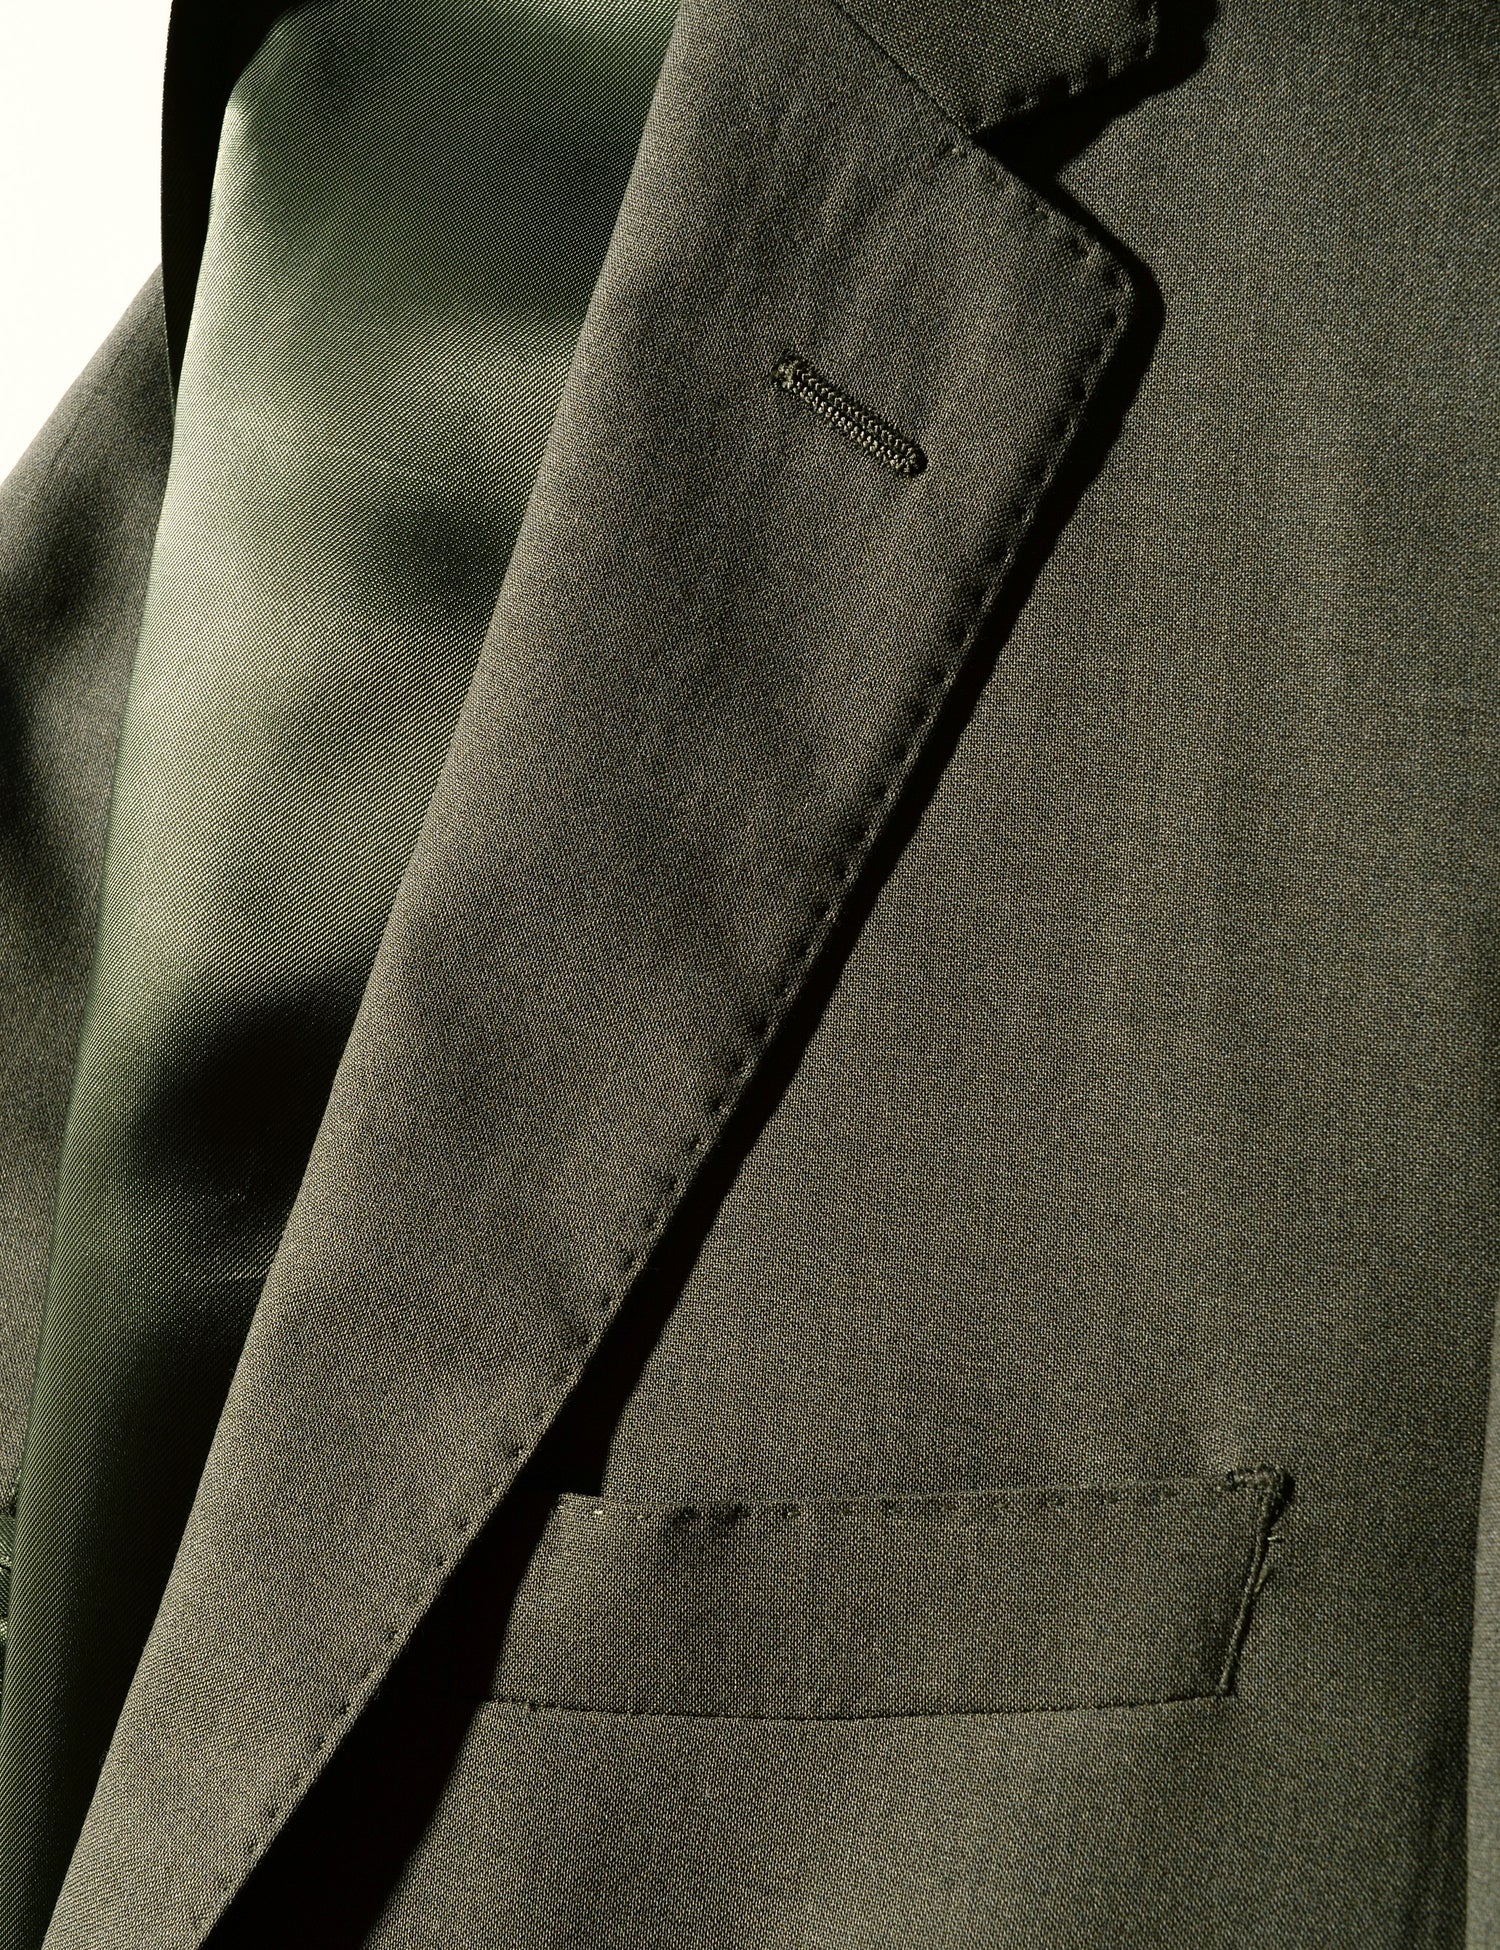 Detail of Brooklyn Tailors BKT50 Tailored Jacket in 14.5 Micron Mouliné - Agave Green showing lapel, pocket, and lining